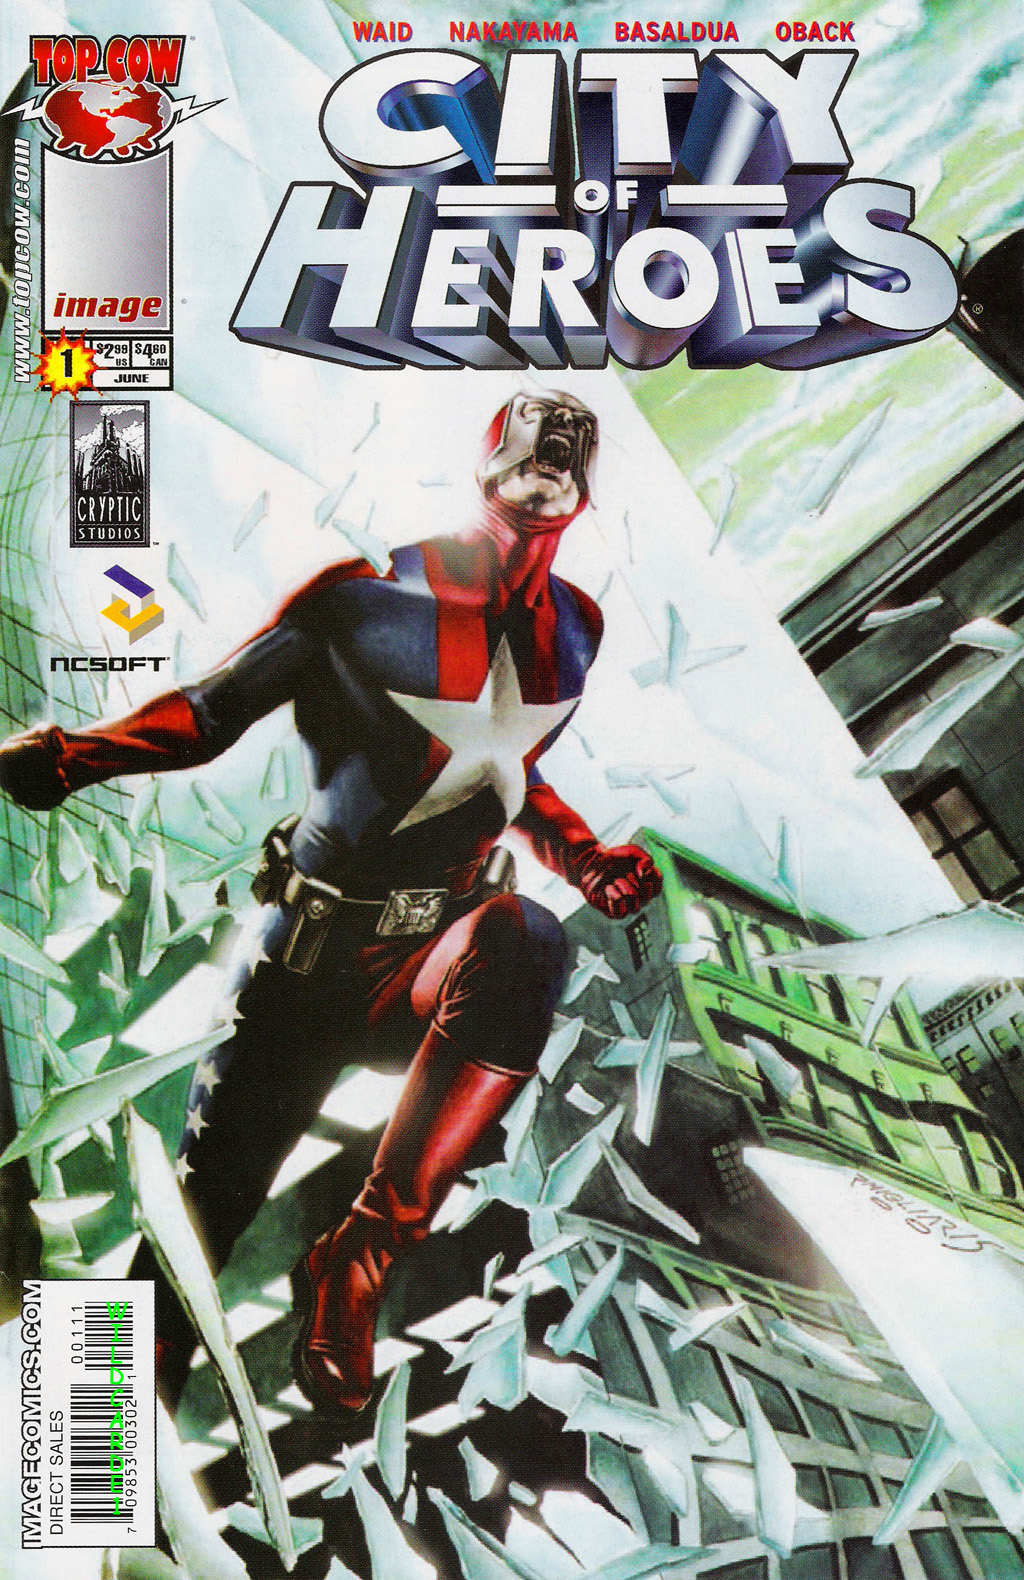 Read online City of Heroes (2005) comic -  Issue #1 - 1